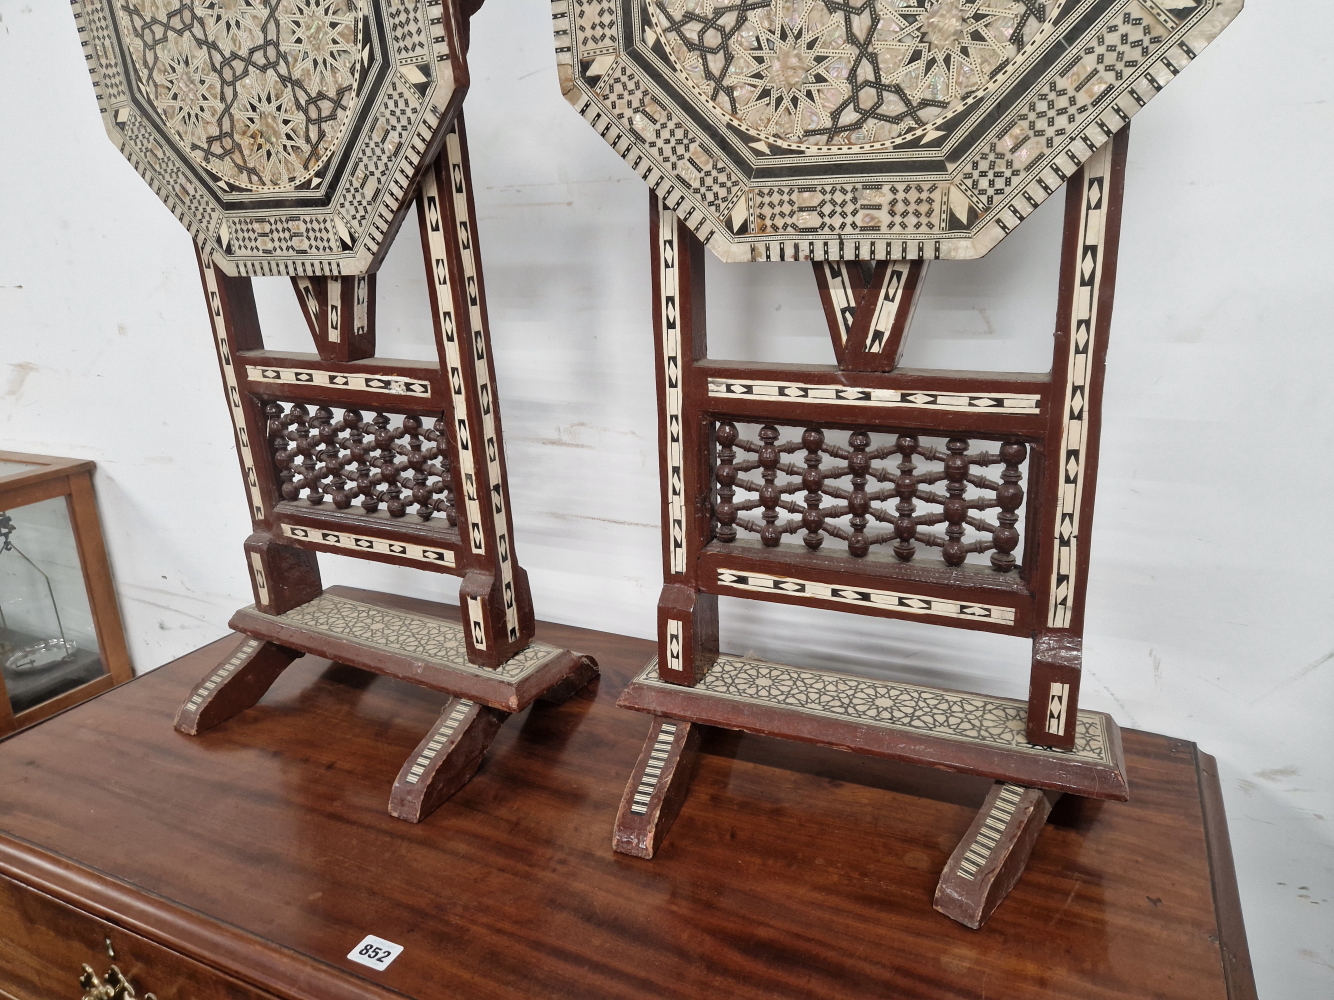 A PAIR OF ISLAMIC FOLDING OCTAGONAL TABLES GEOMETRICALLY INLAID IN MOTHER OF PEARL AND EBONY - Image 5 of 13